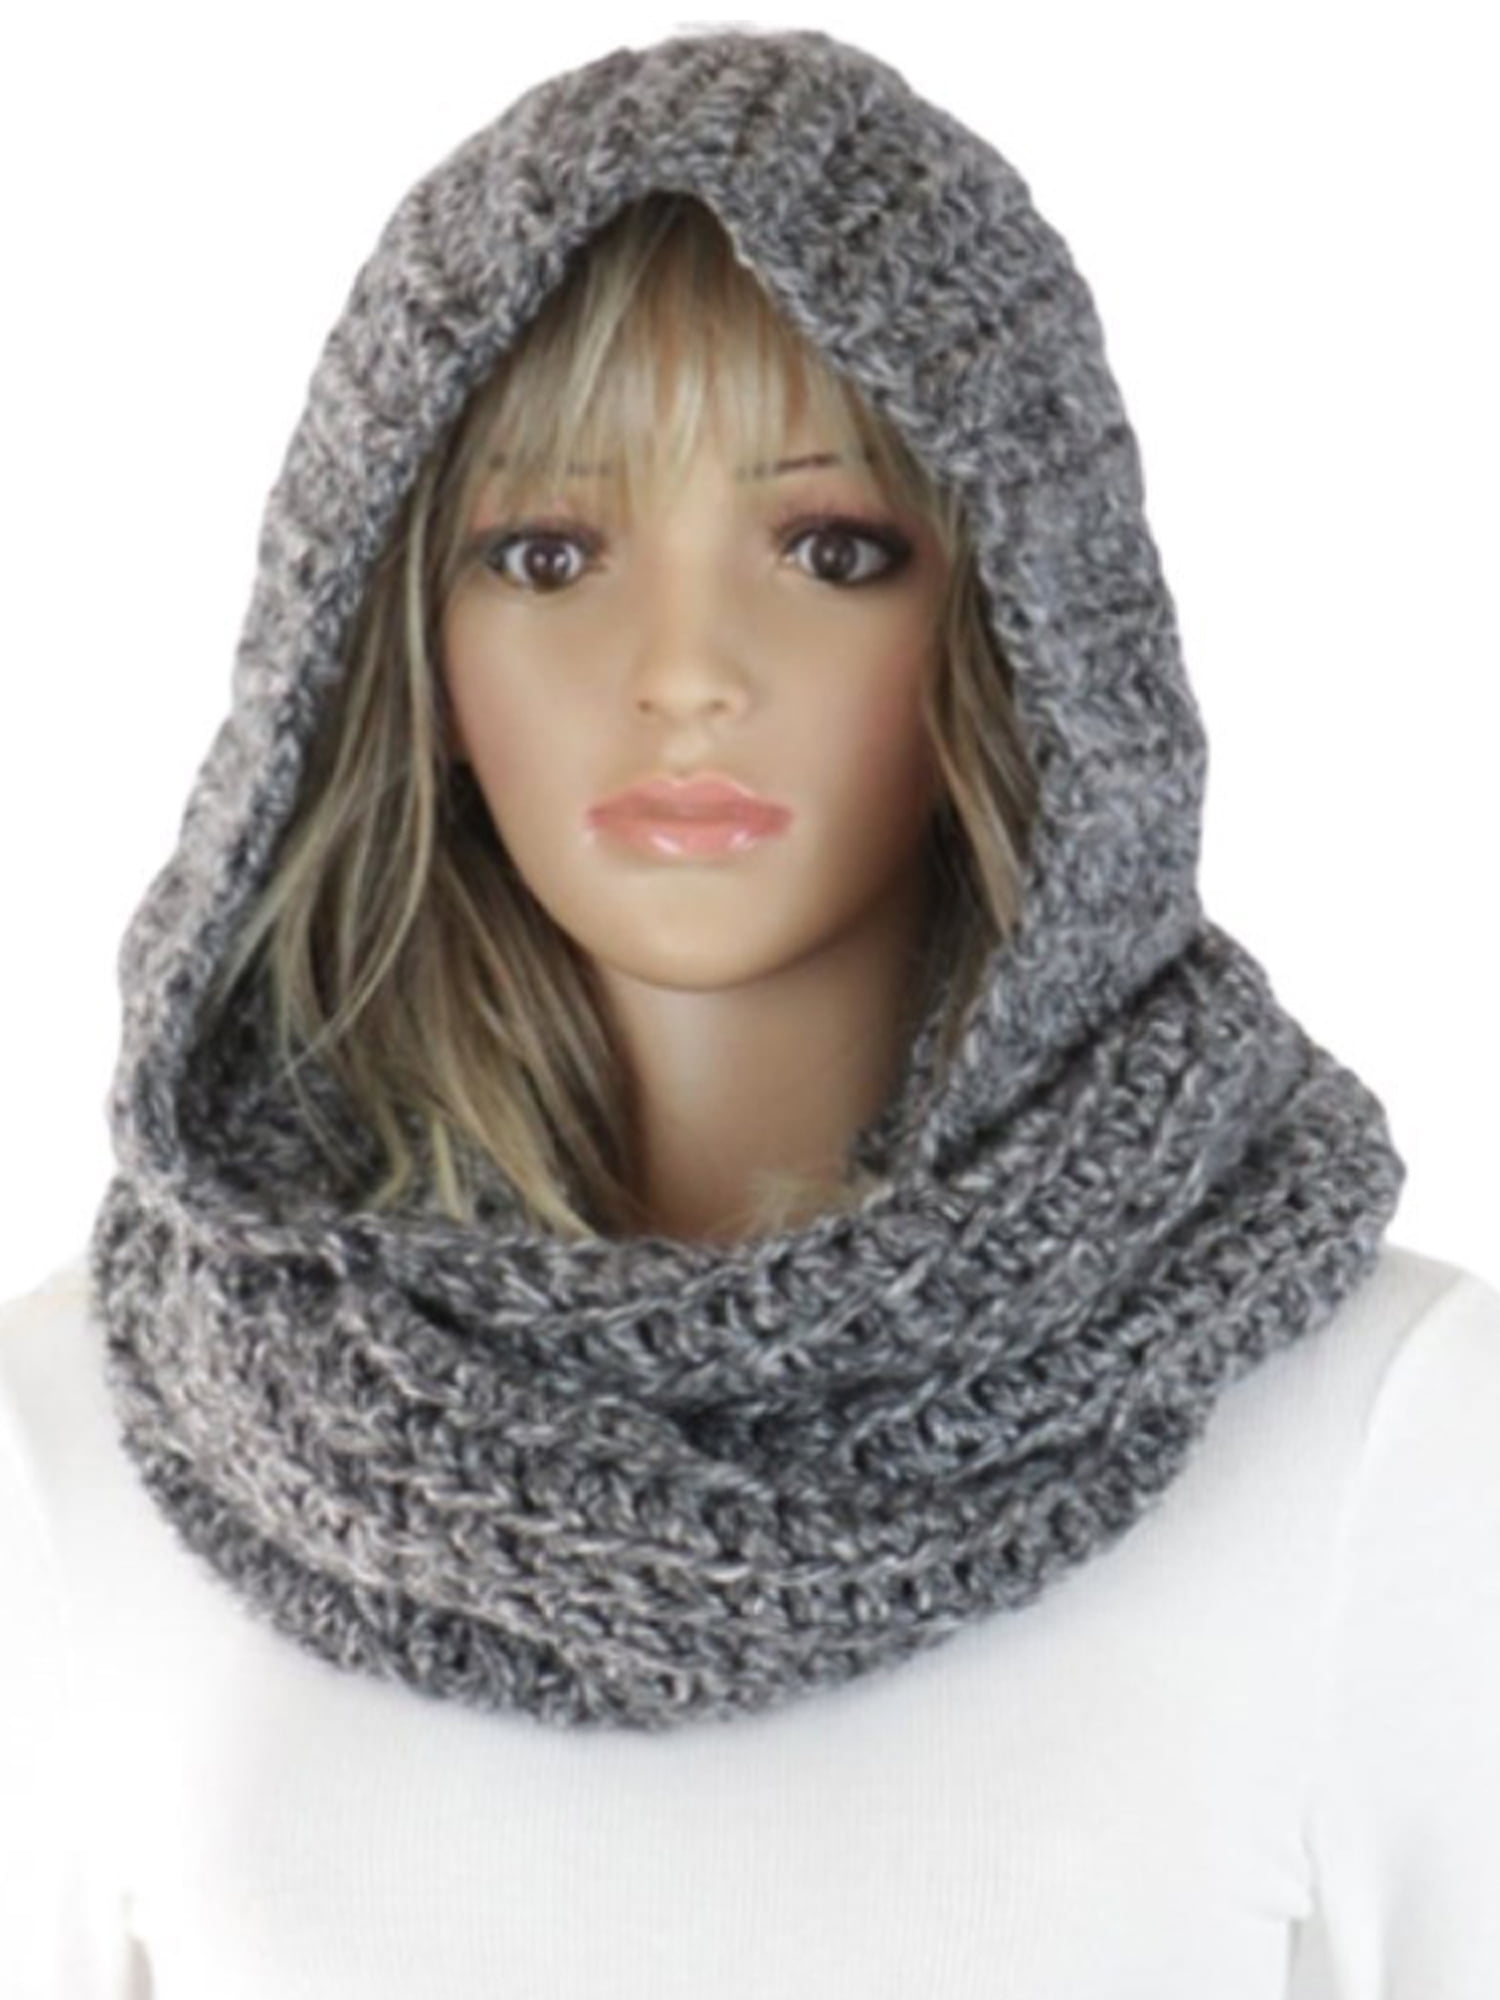 Upairc Womens Winter Knitted Hood Scarf Hat Neck Warm Hooded Scarves Head Wrap Muffler 